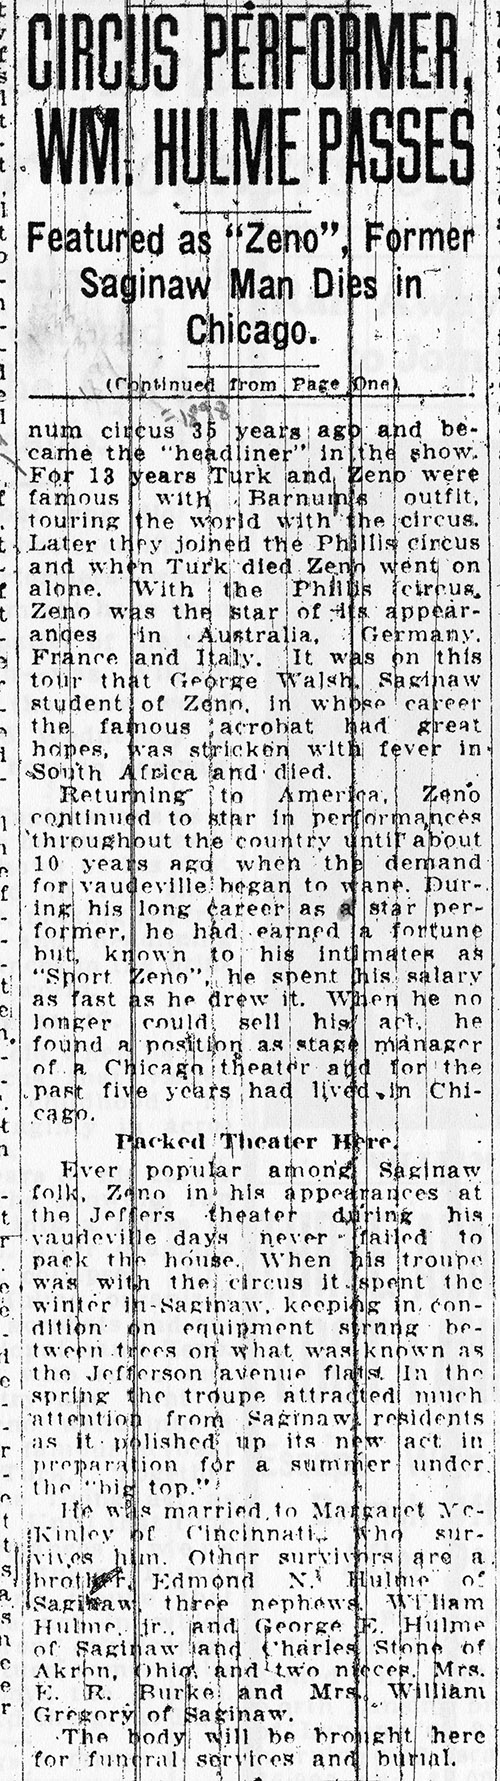 A news paper clipping about the passing of circus performer WM. Hulme.